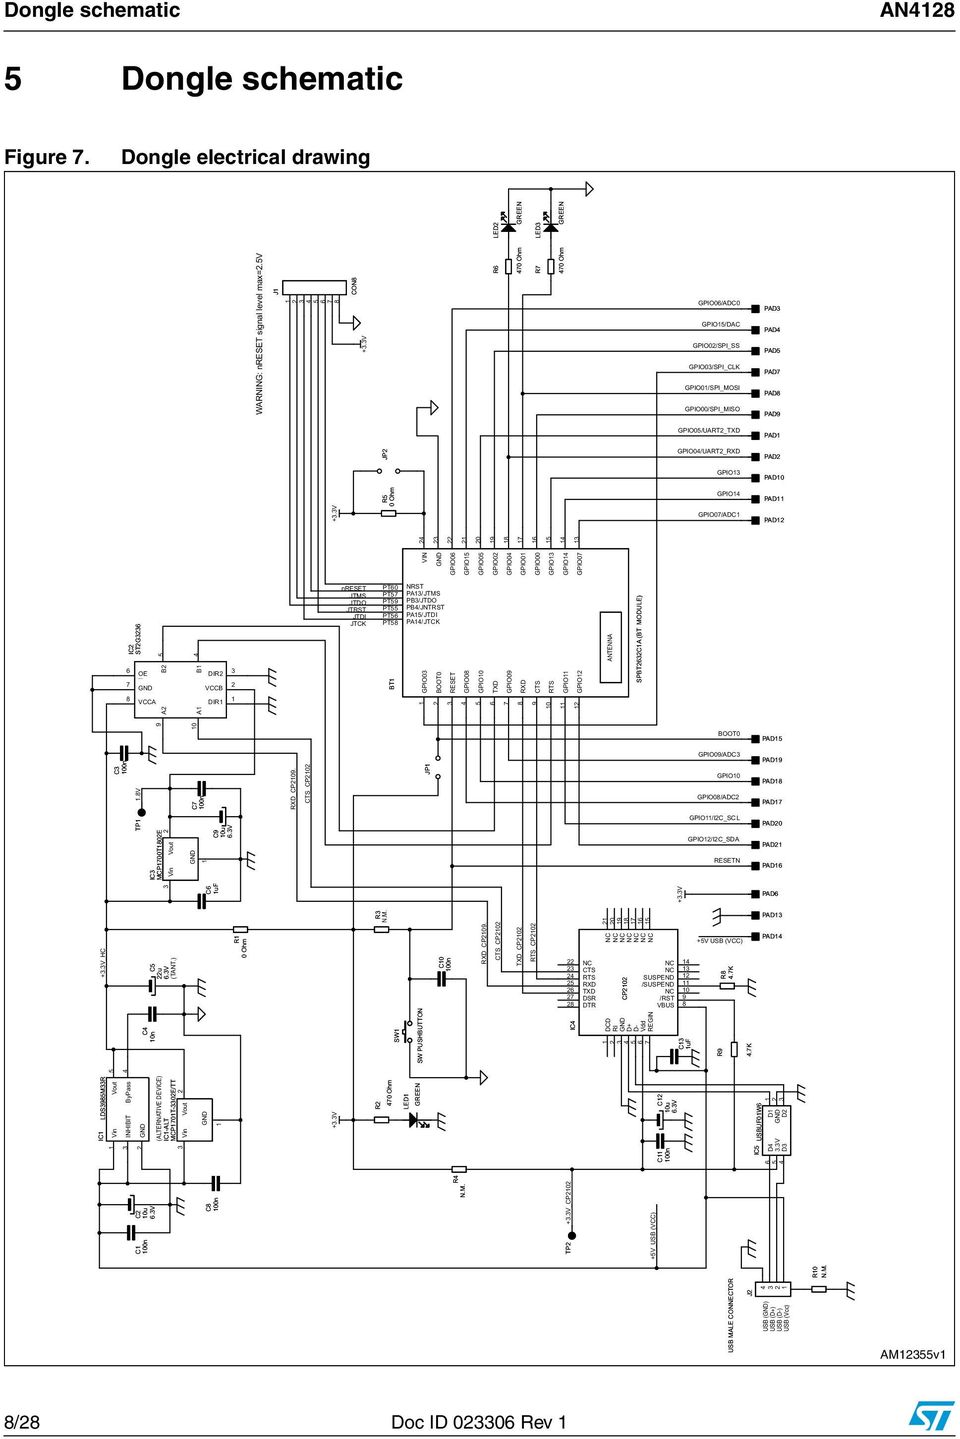 5 Dongle schematic Figure